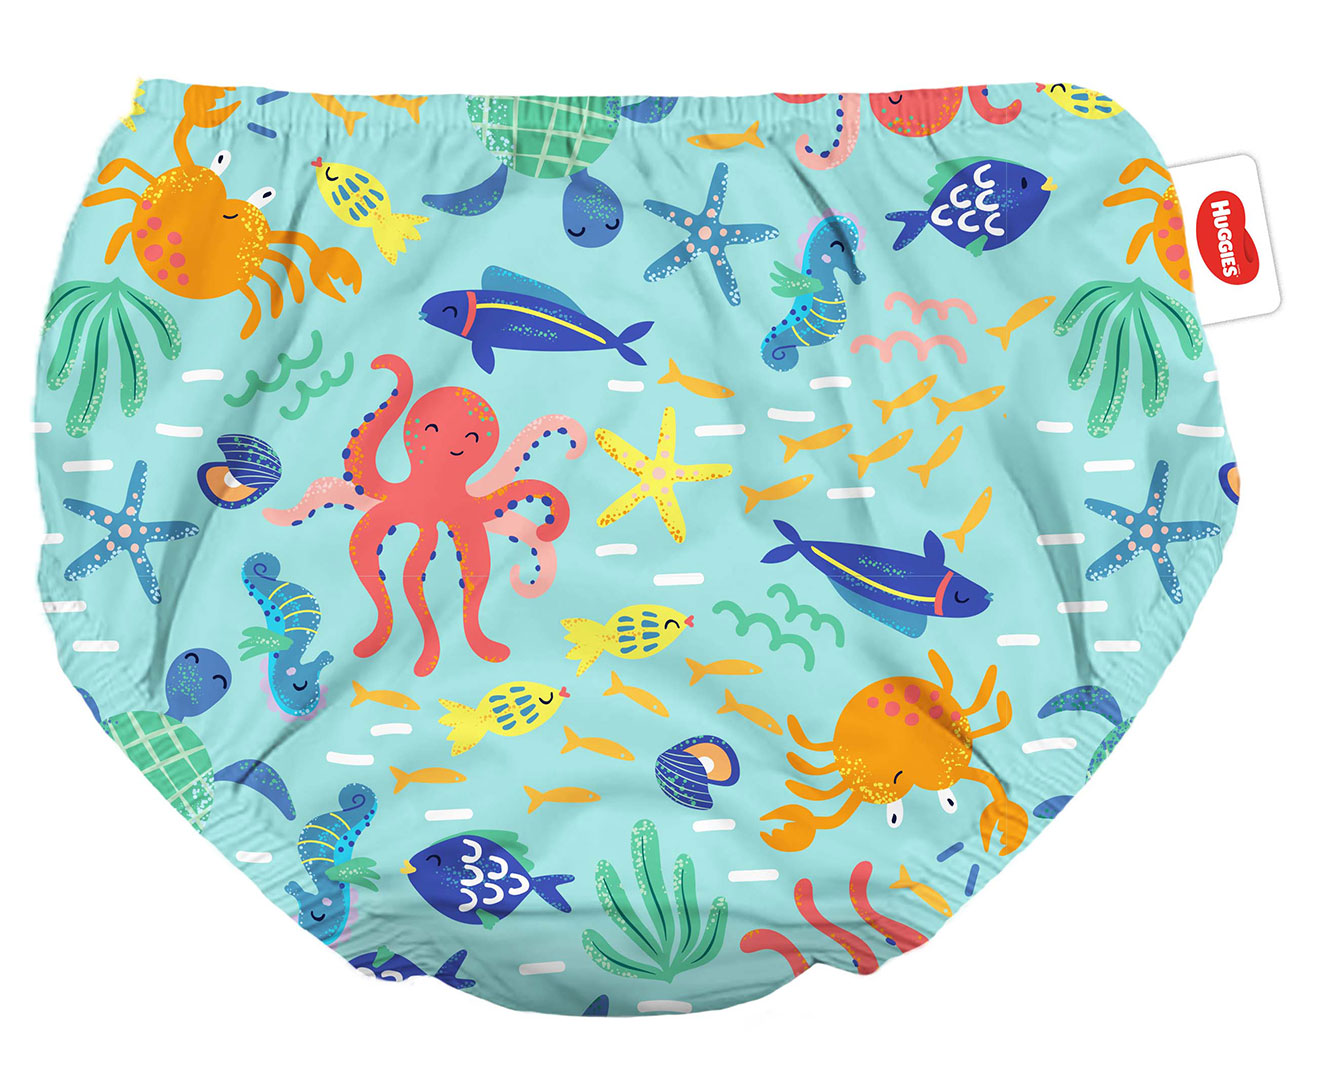 Huggies Little Swimmers Reusable Swim Nappy Under The Sea